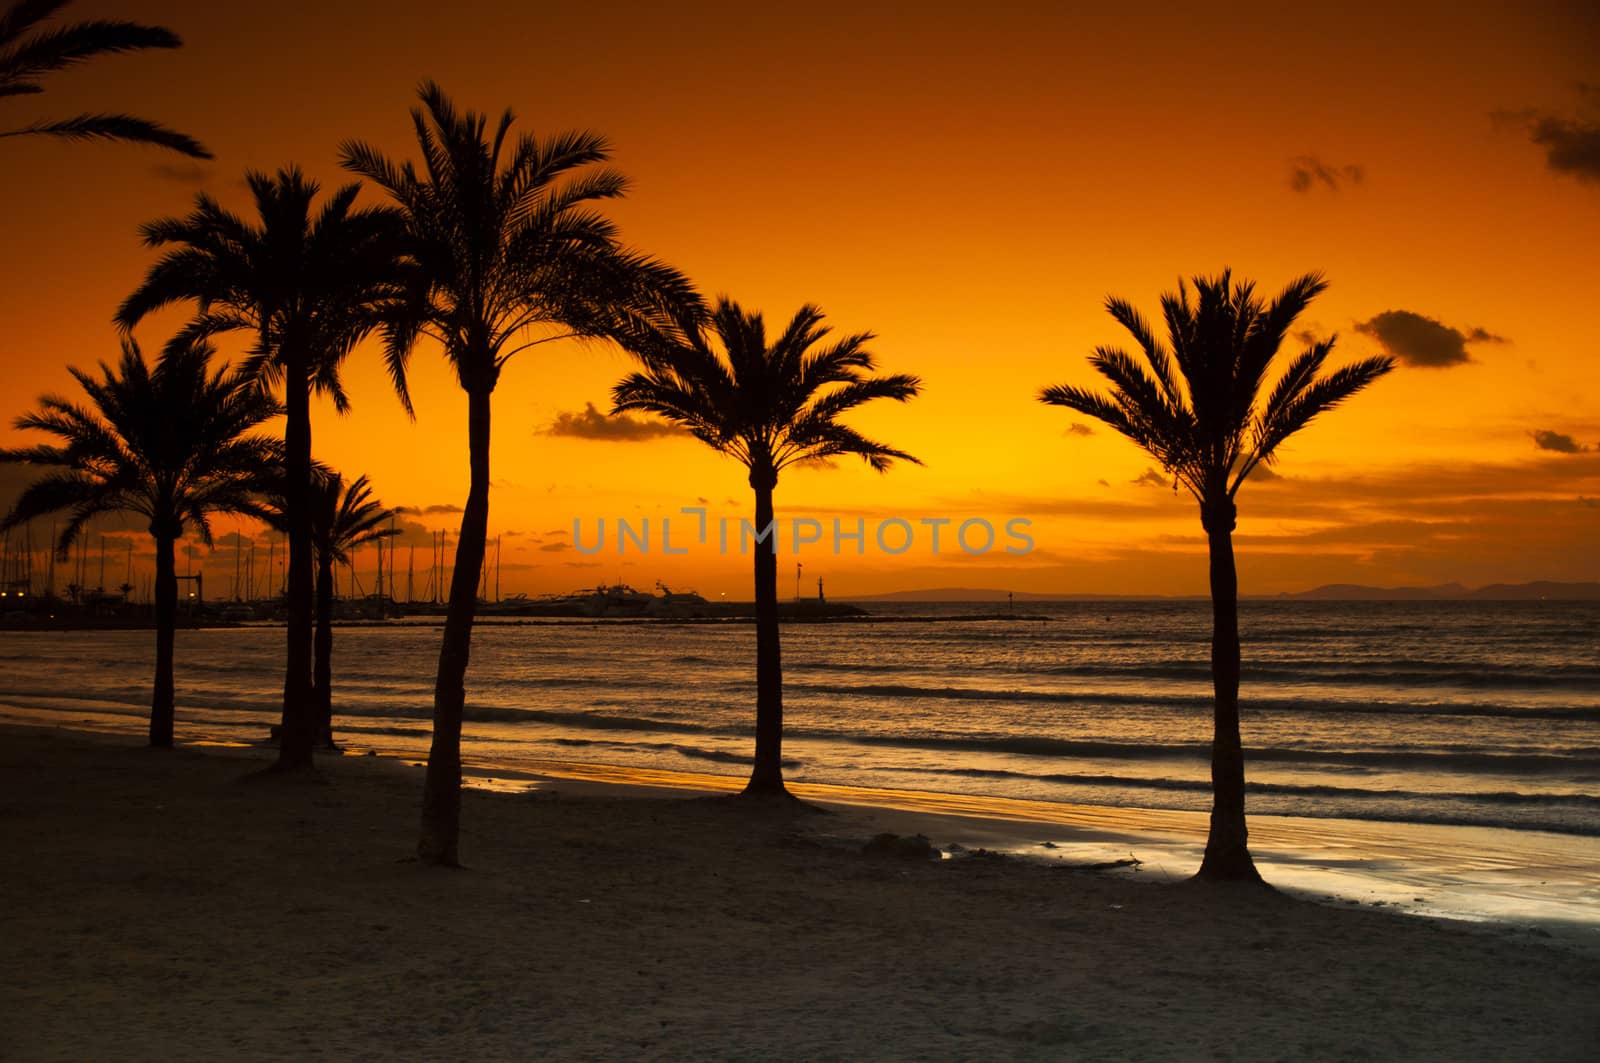 Sunset on the arenal beach on the island of Mallorca in Spain